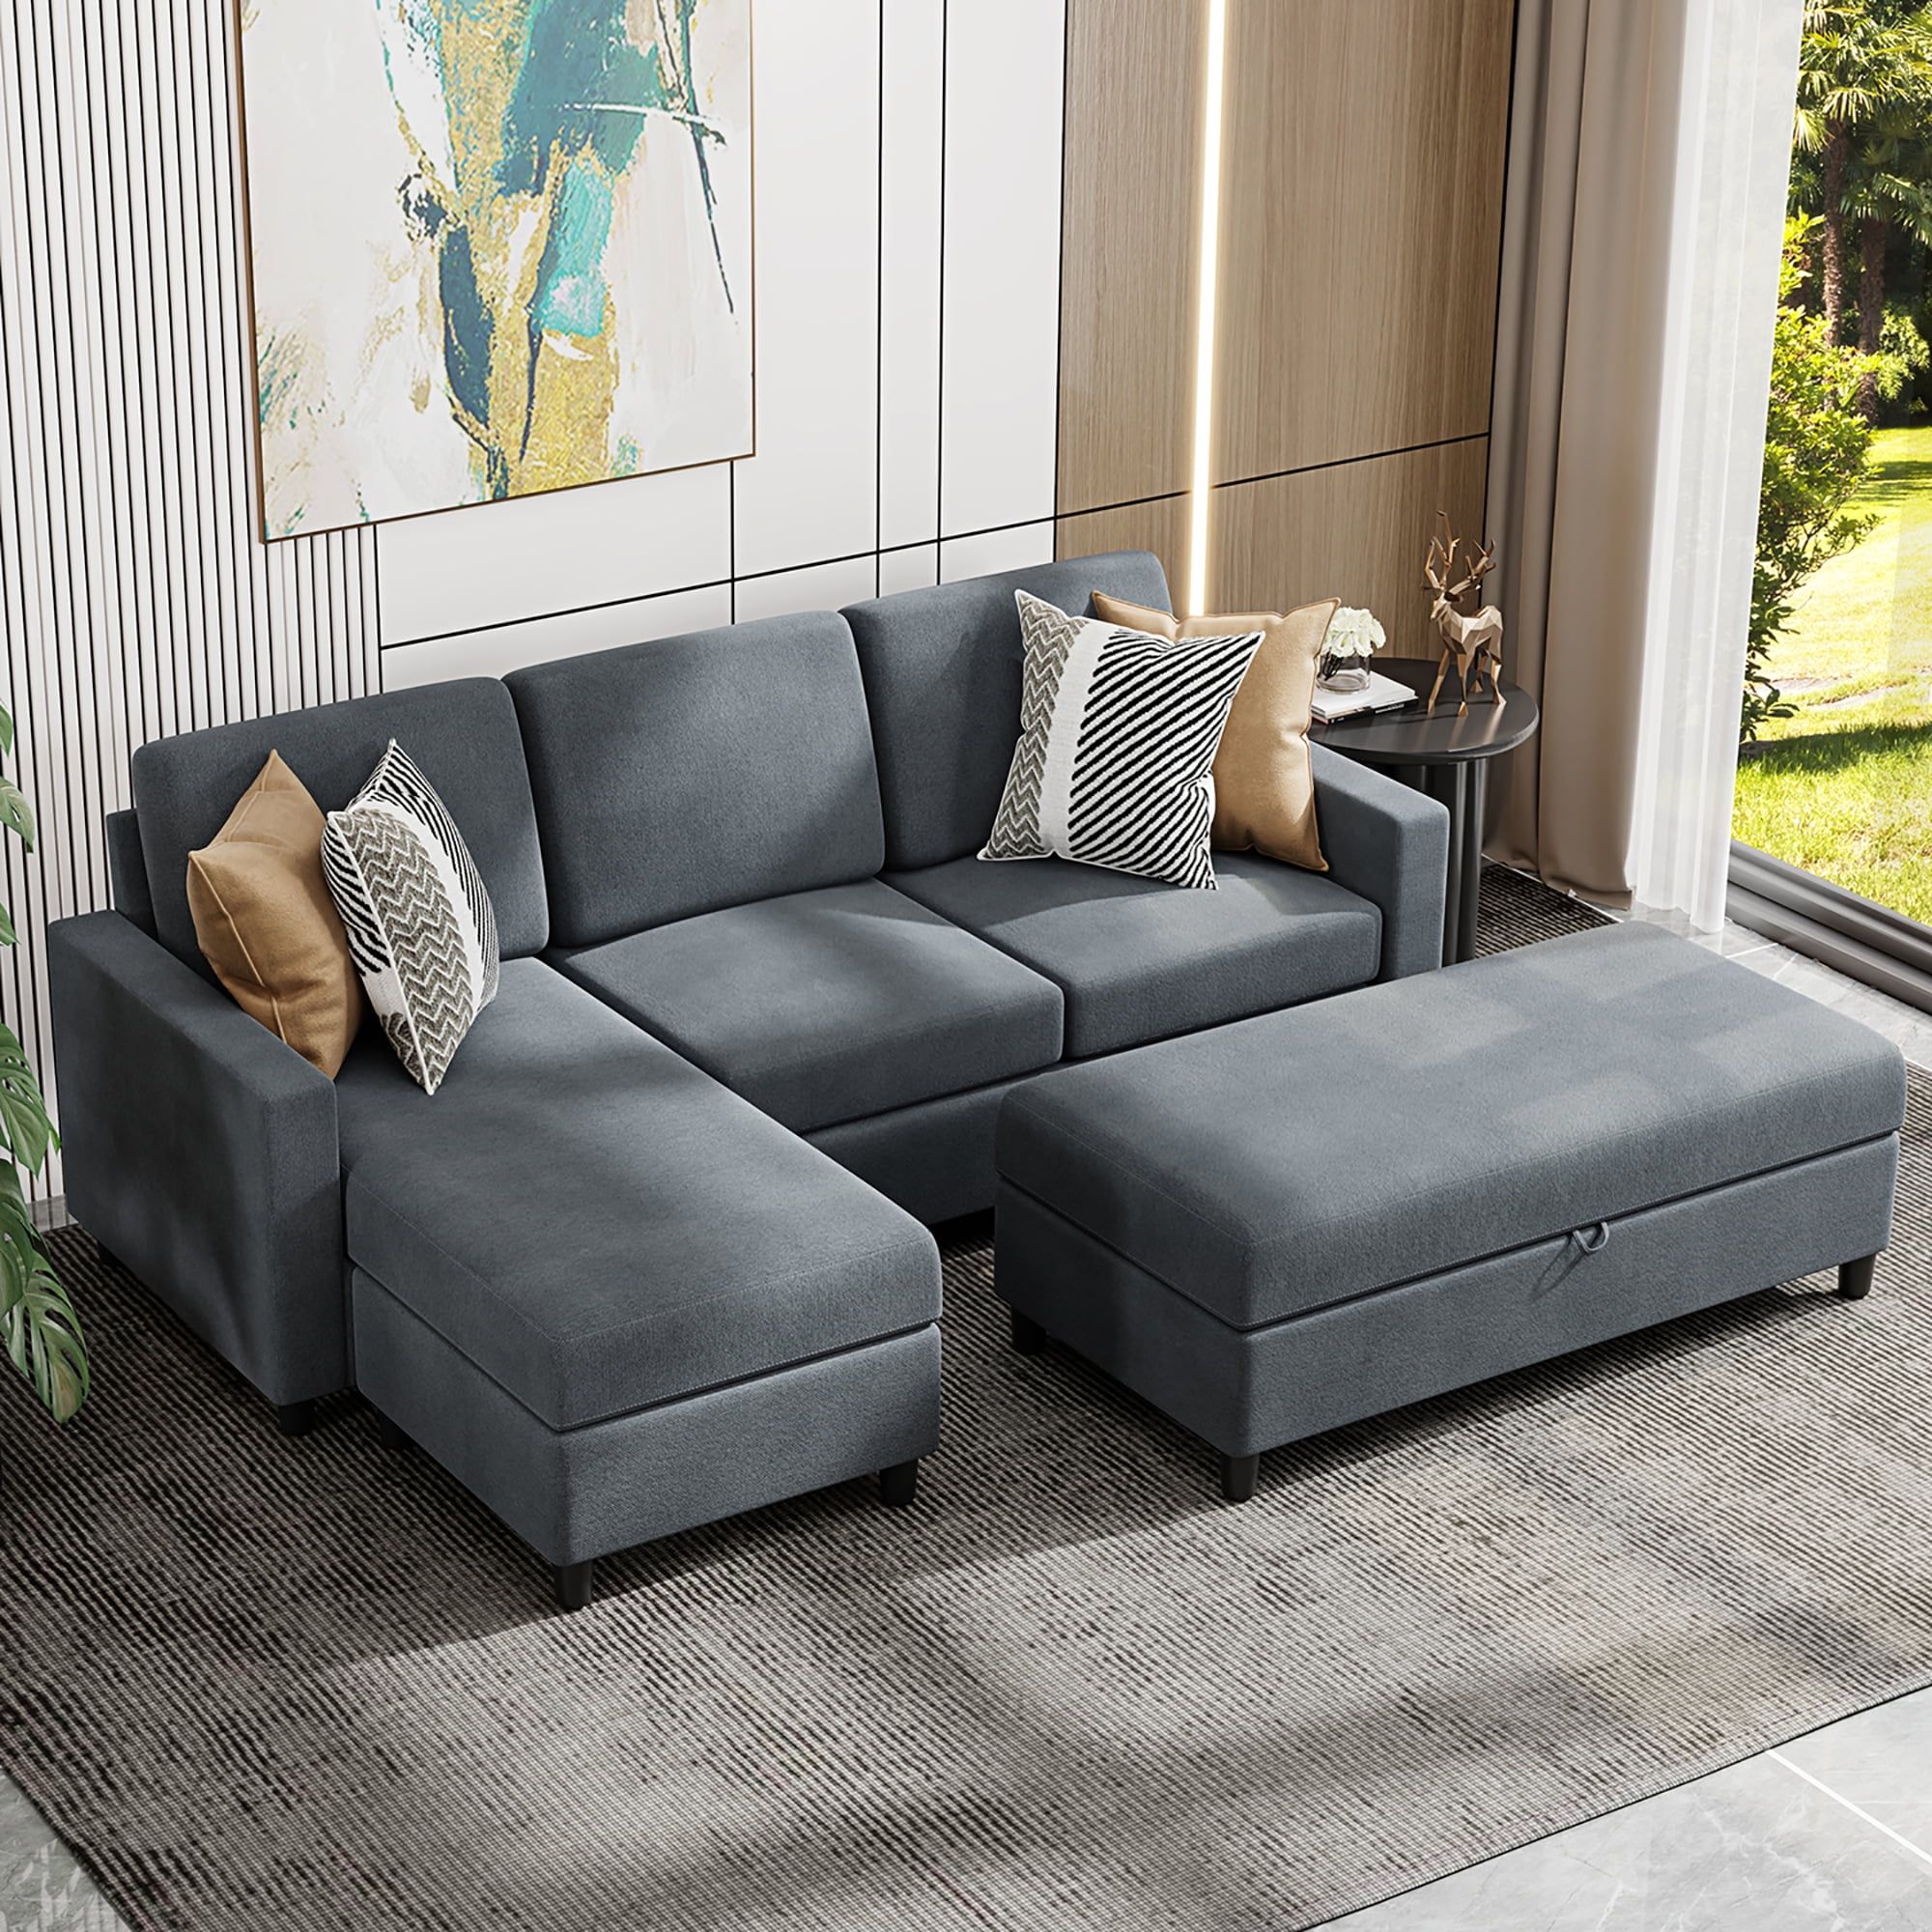 Convertible Sectional Sofa Couch With Storage Ottoman, L Shaped Wide  Reversible Chaise With Linen Fabric(charcoal Grey) – Walmart With Regard To Sofas With Ottomans (View 6 of 15)